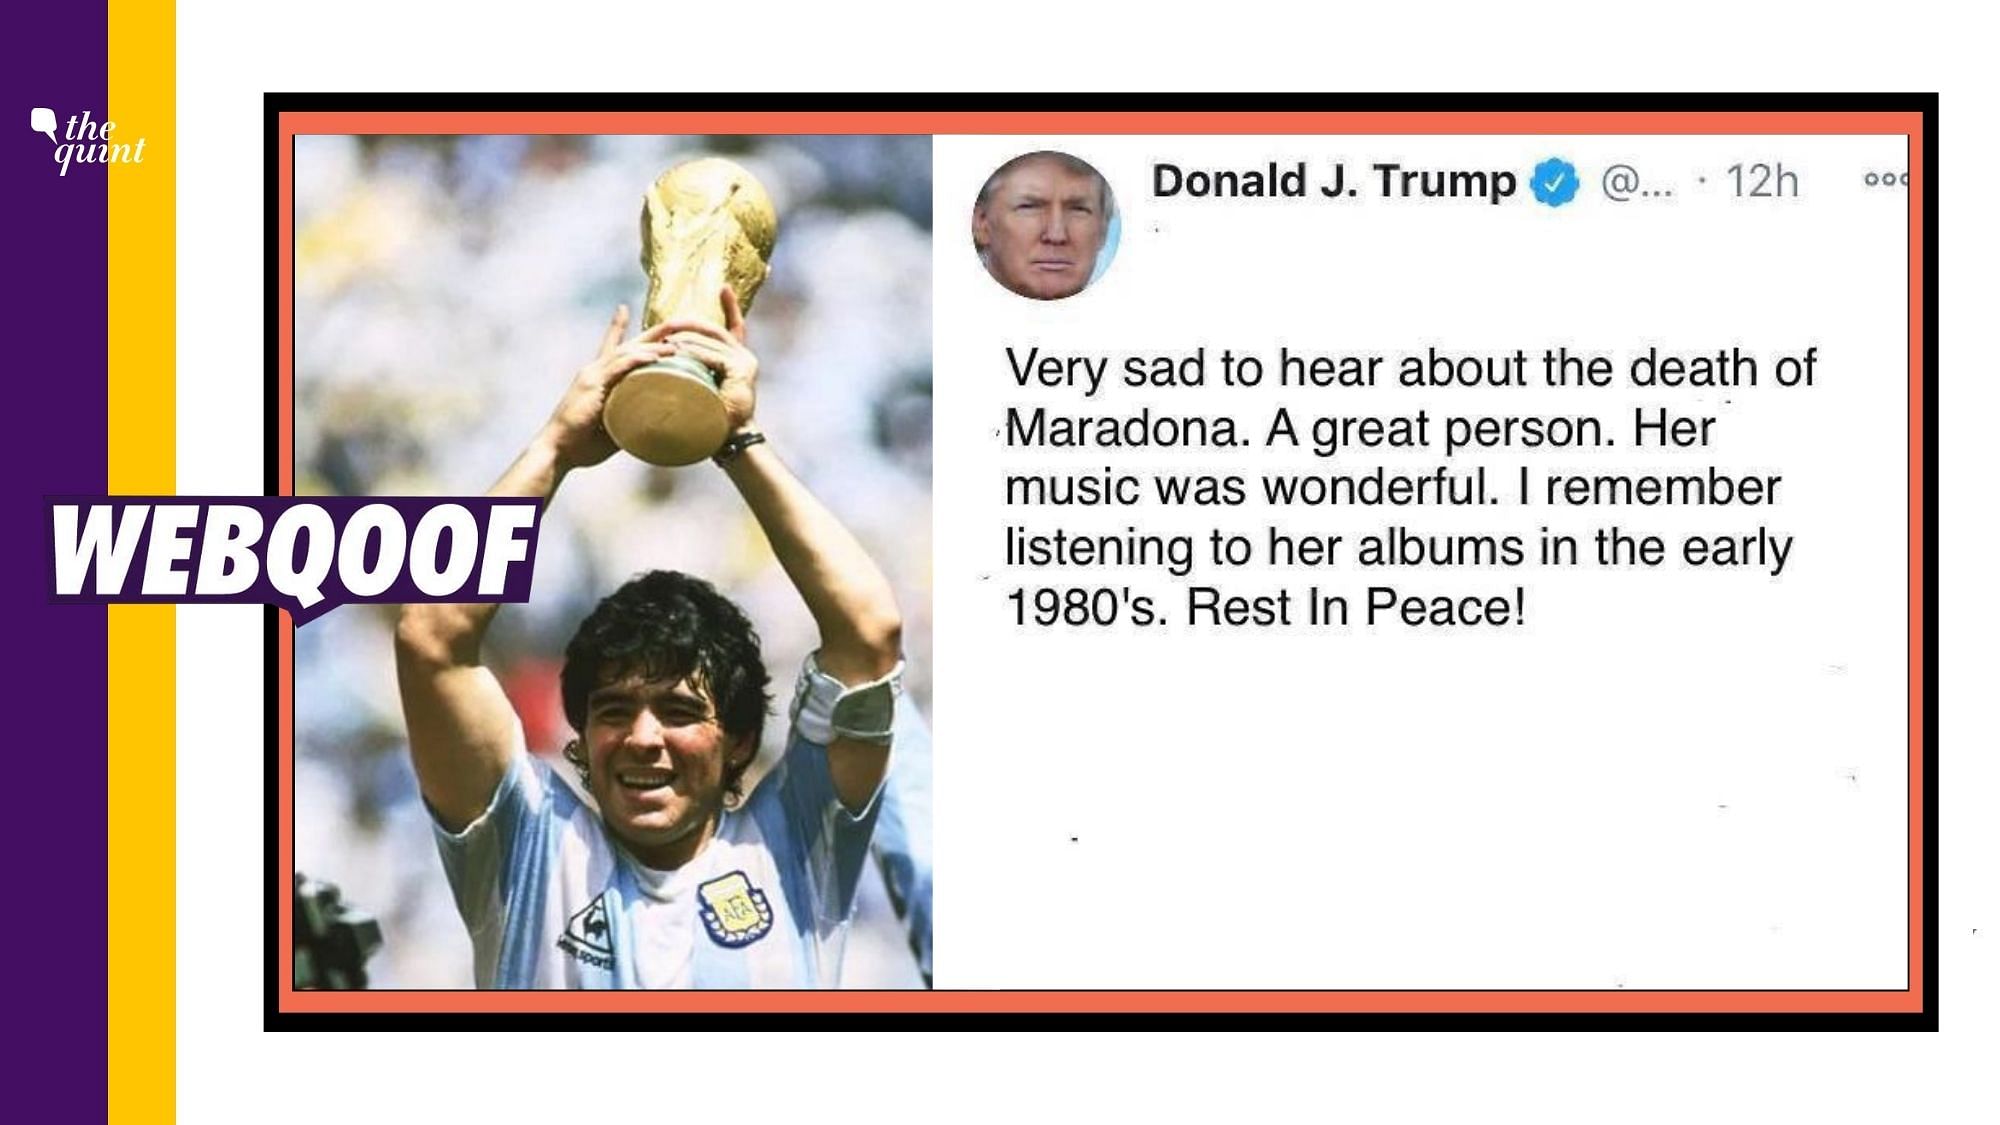 A viral photo claims that Donald Trump confused football legend Diego Maradona with famous American singer and songwriter Madonna.